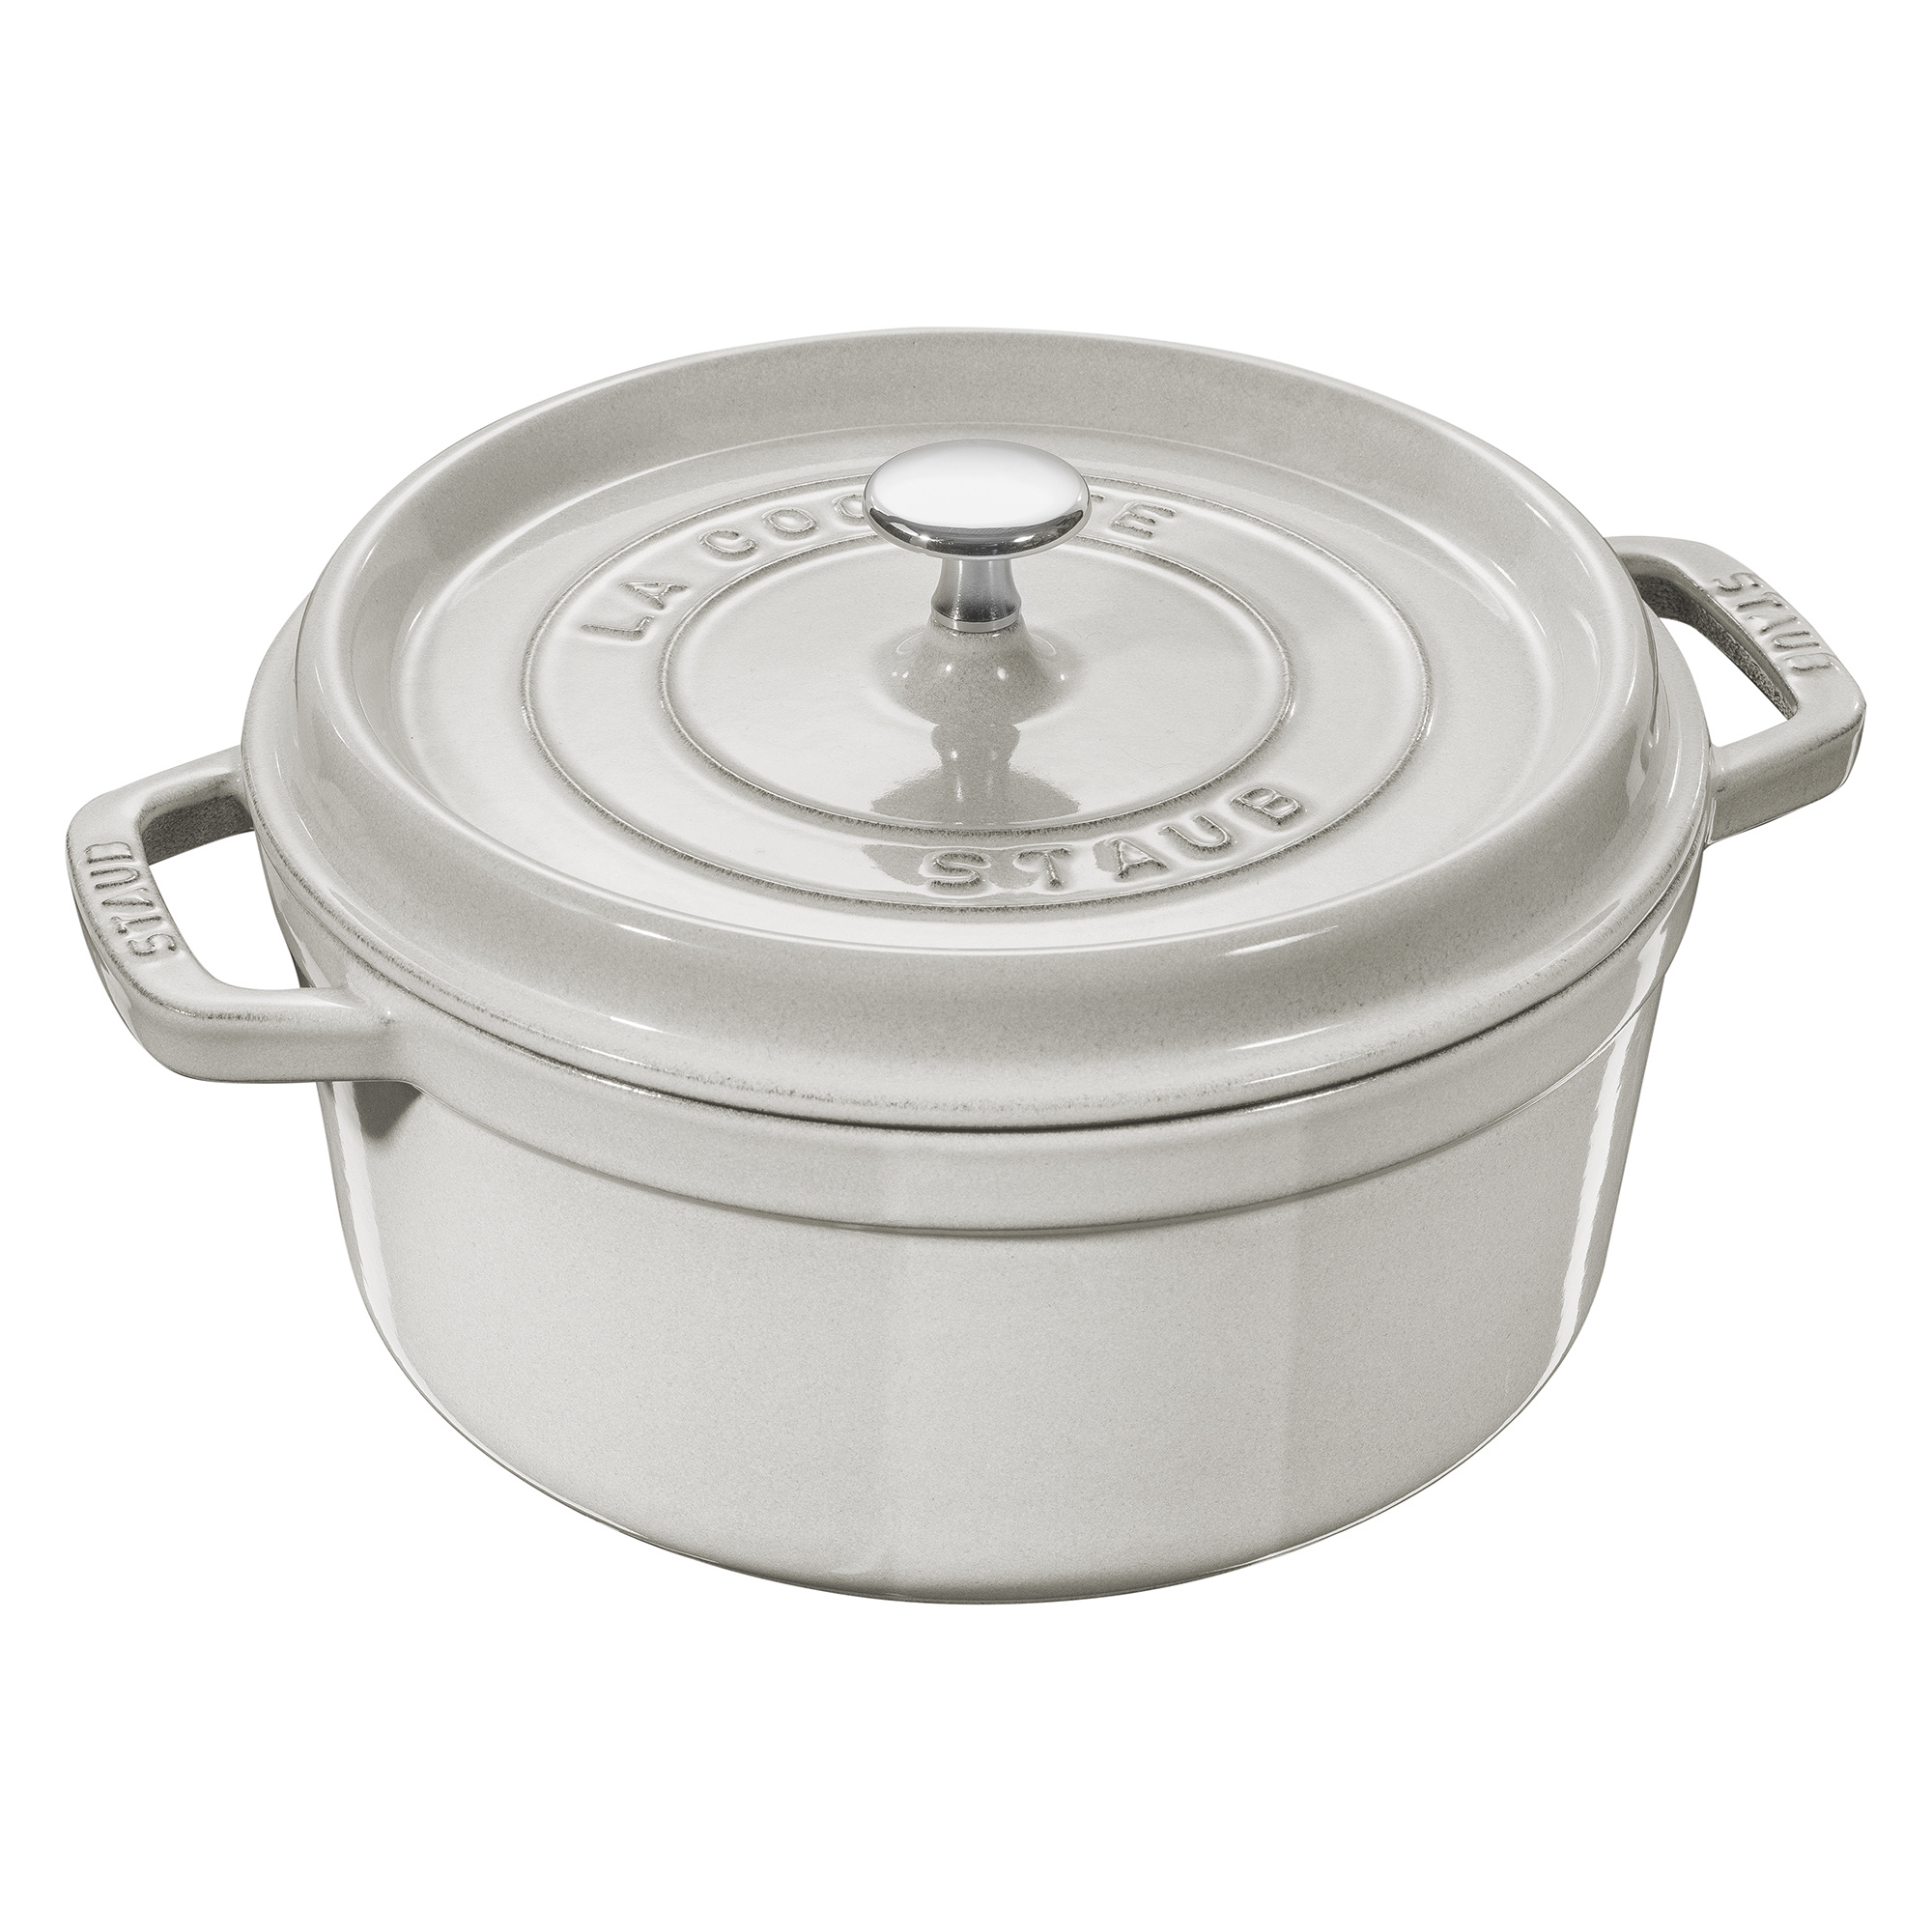 Zwilling J.A. Henckels Staub Cocotte